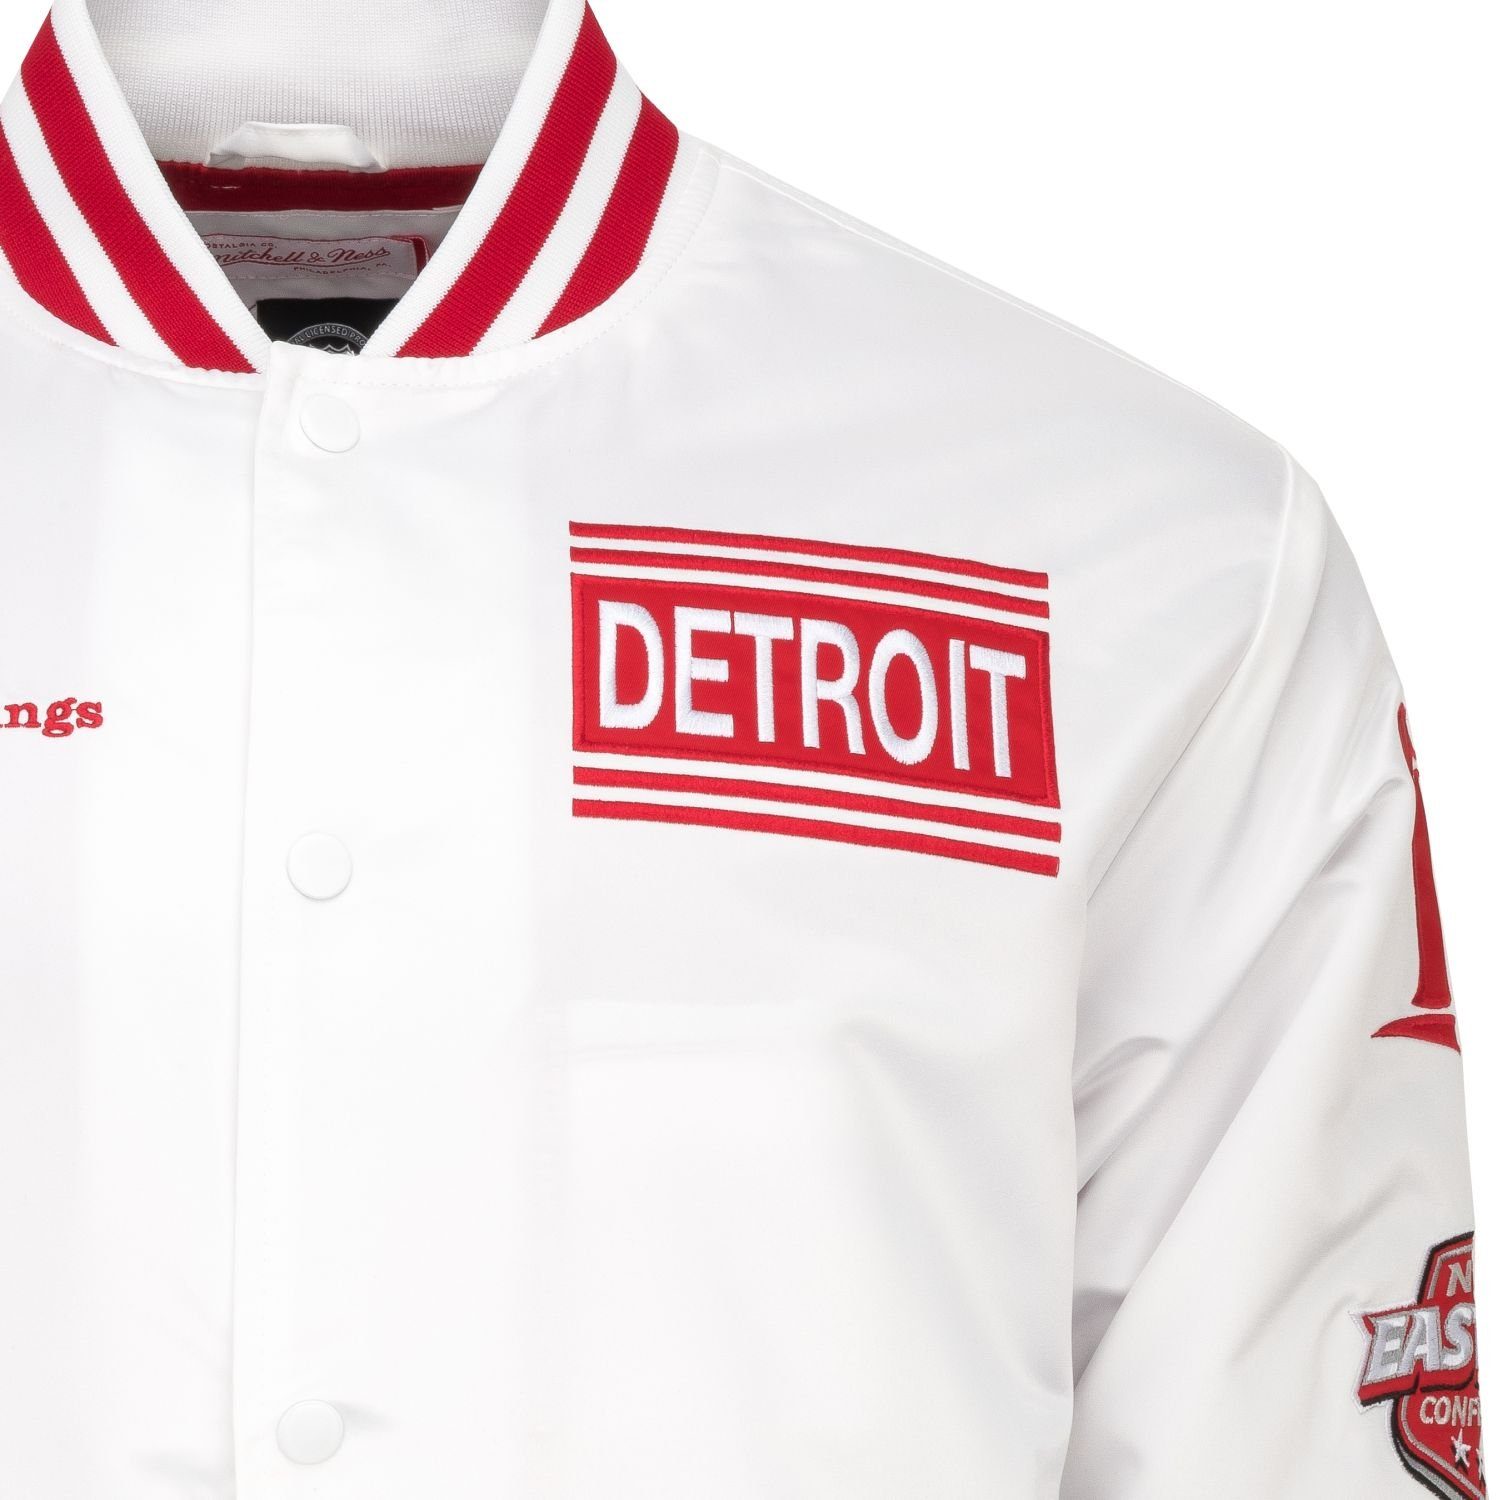 Detroit Satin Wings & Mitchell Ness Collection Red Collegejacke City